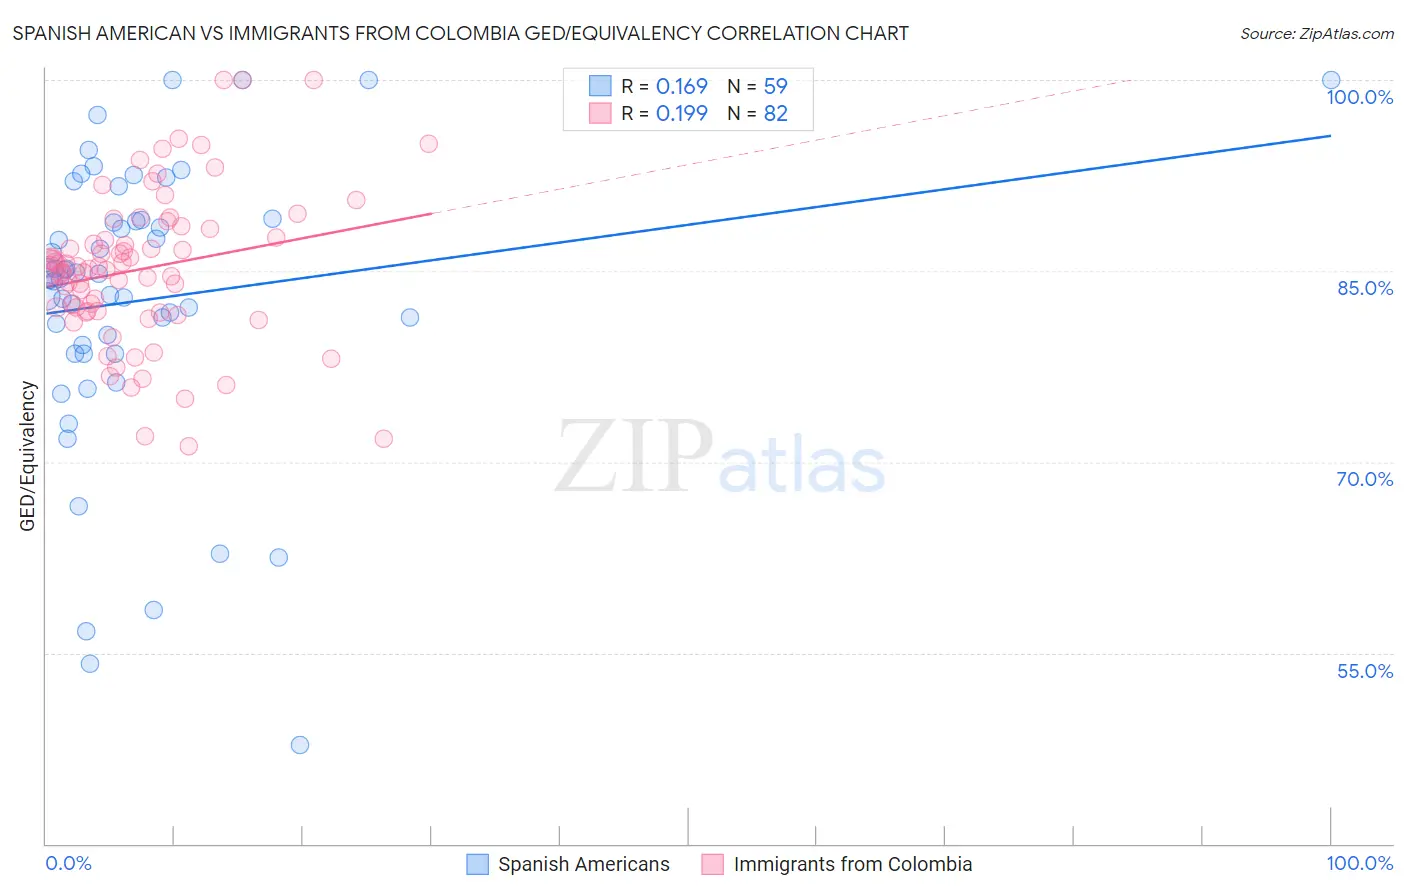 Spanish American vs Immigrants from Colombia GED/Equivalency